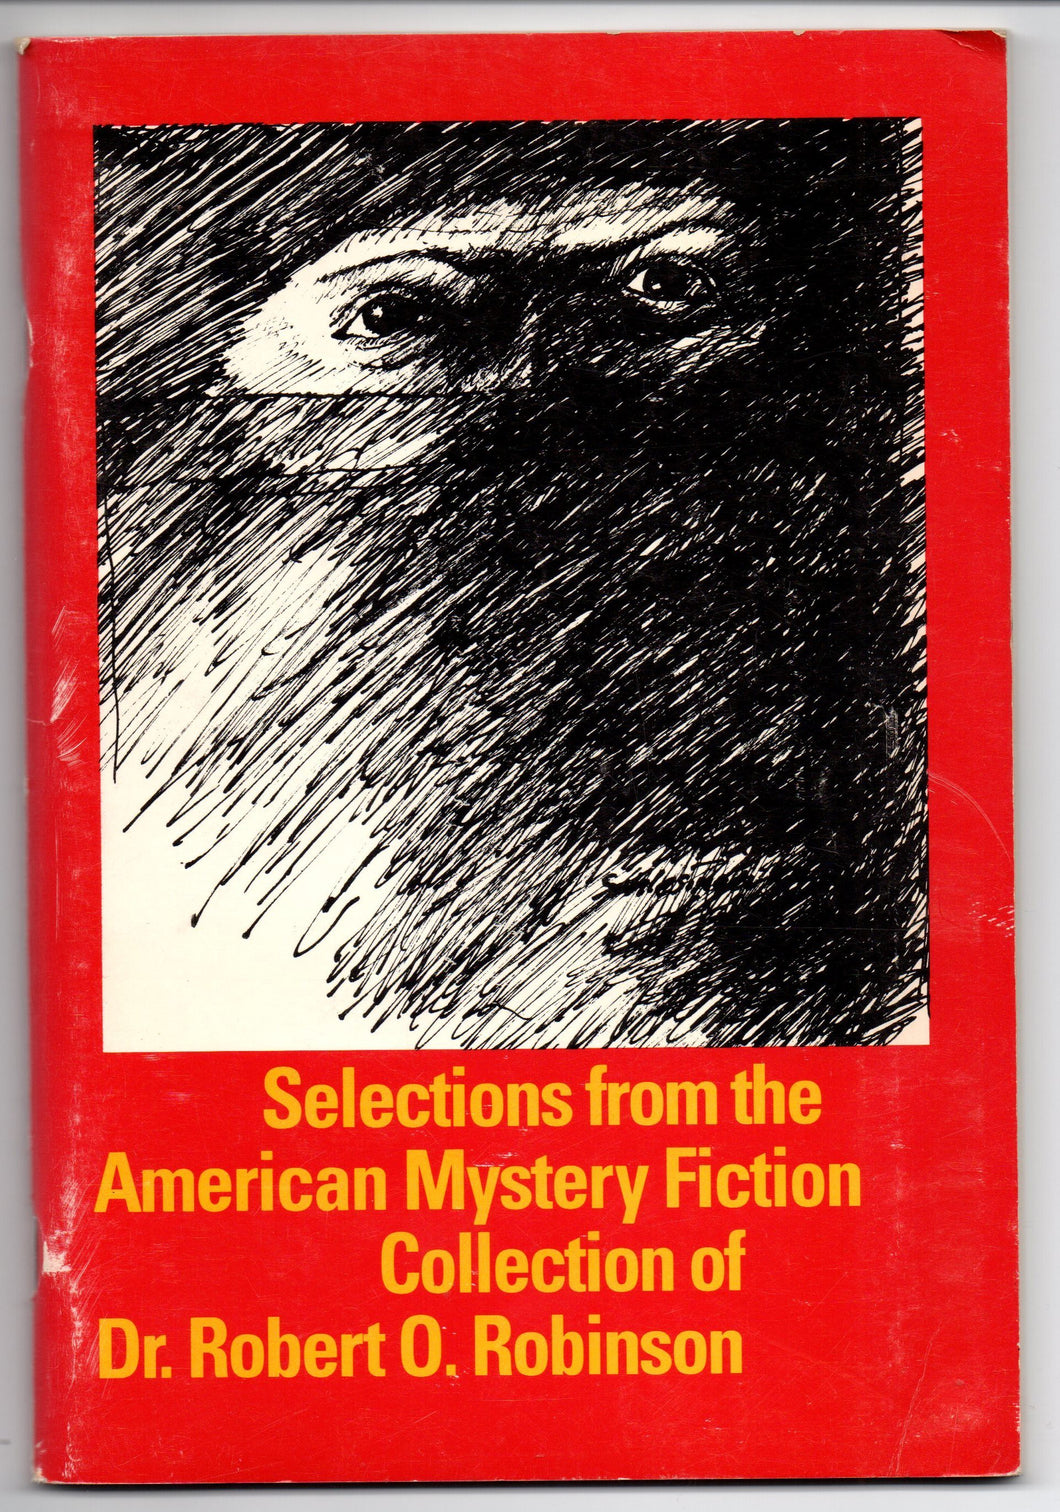 Selections from the American Mystery Fiction Collection of Dr. Robert O. Robinson